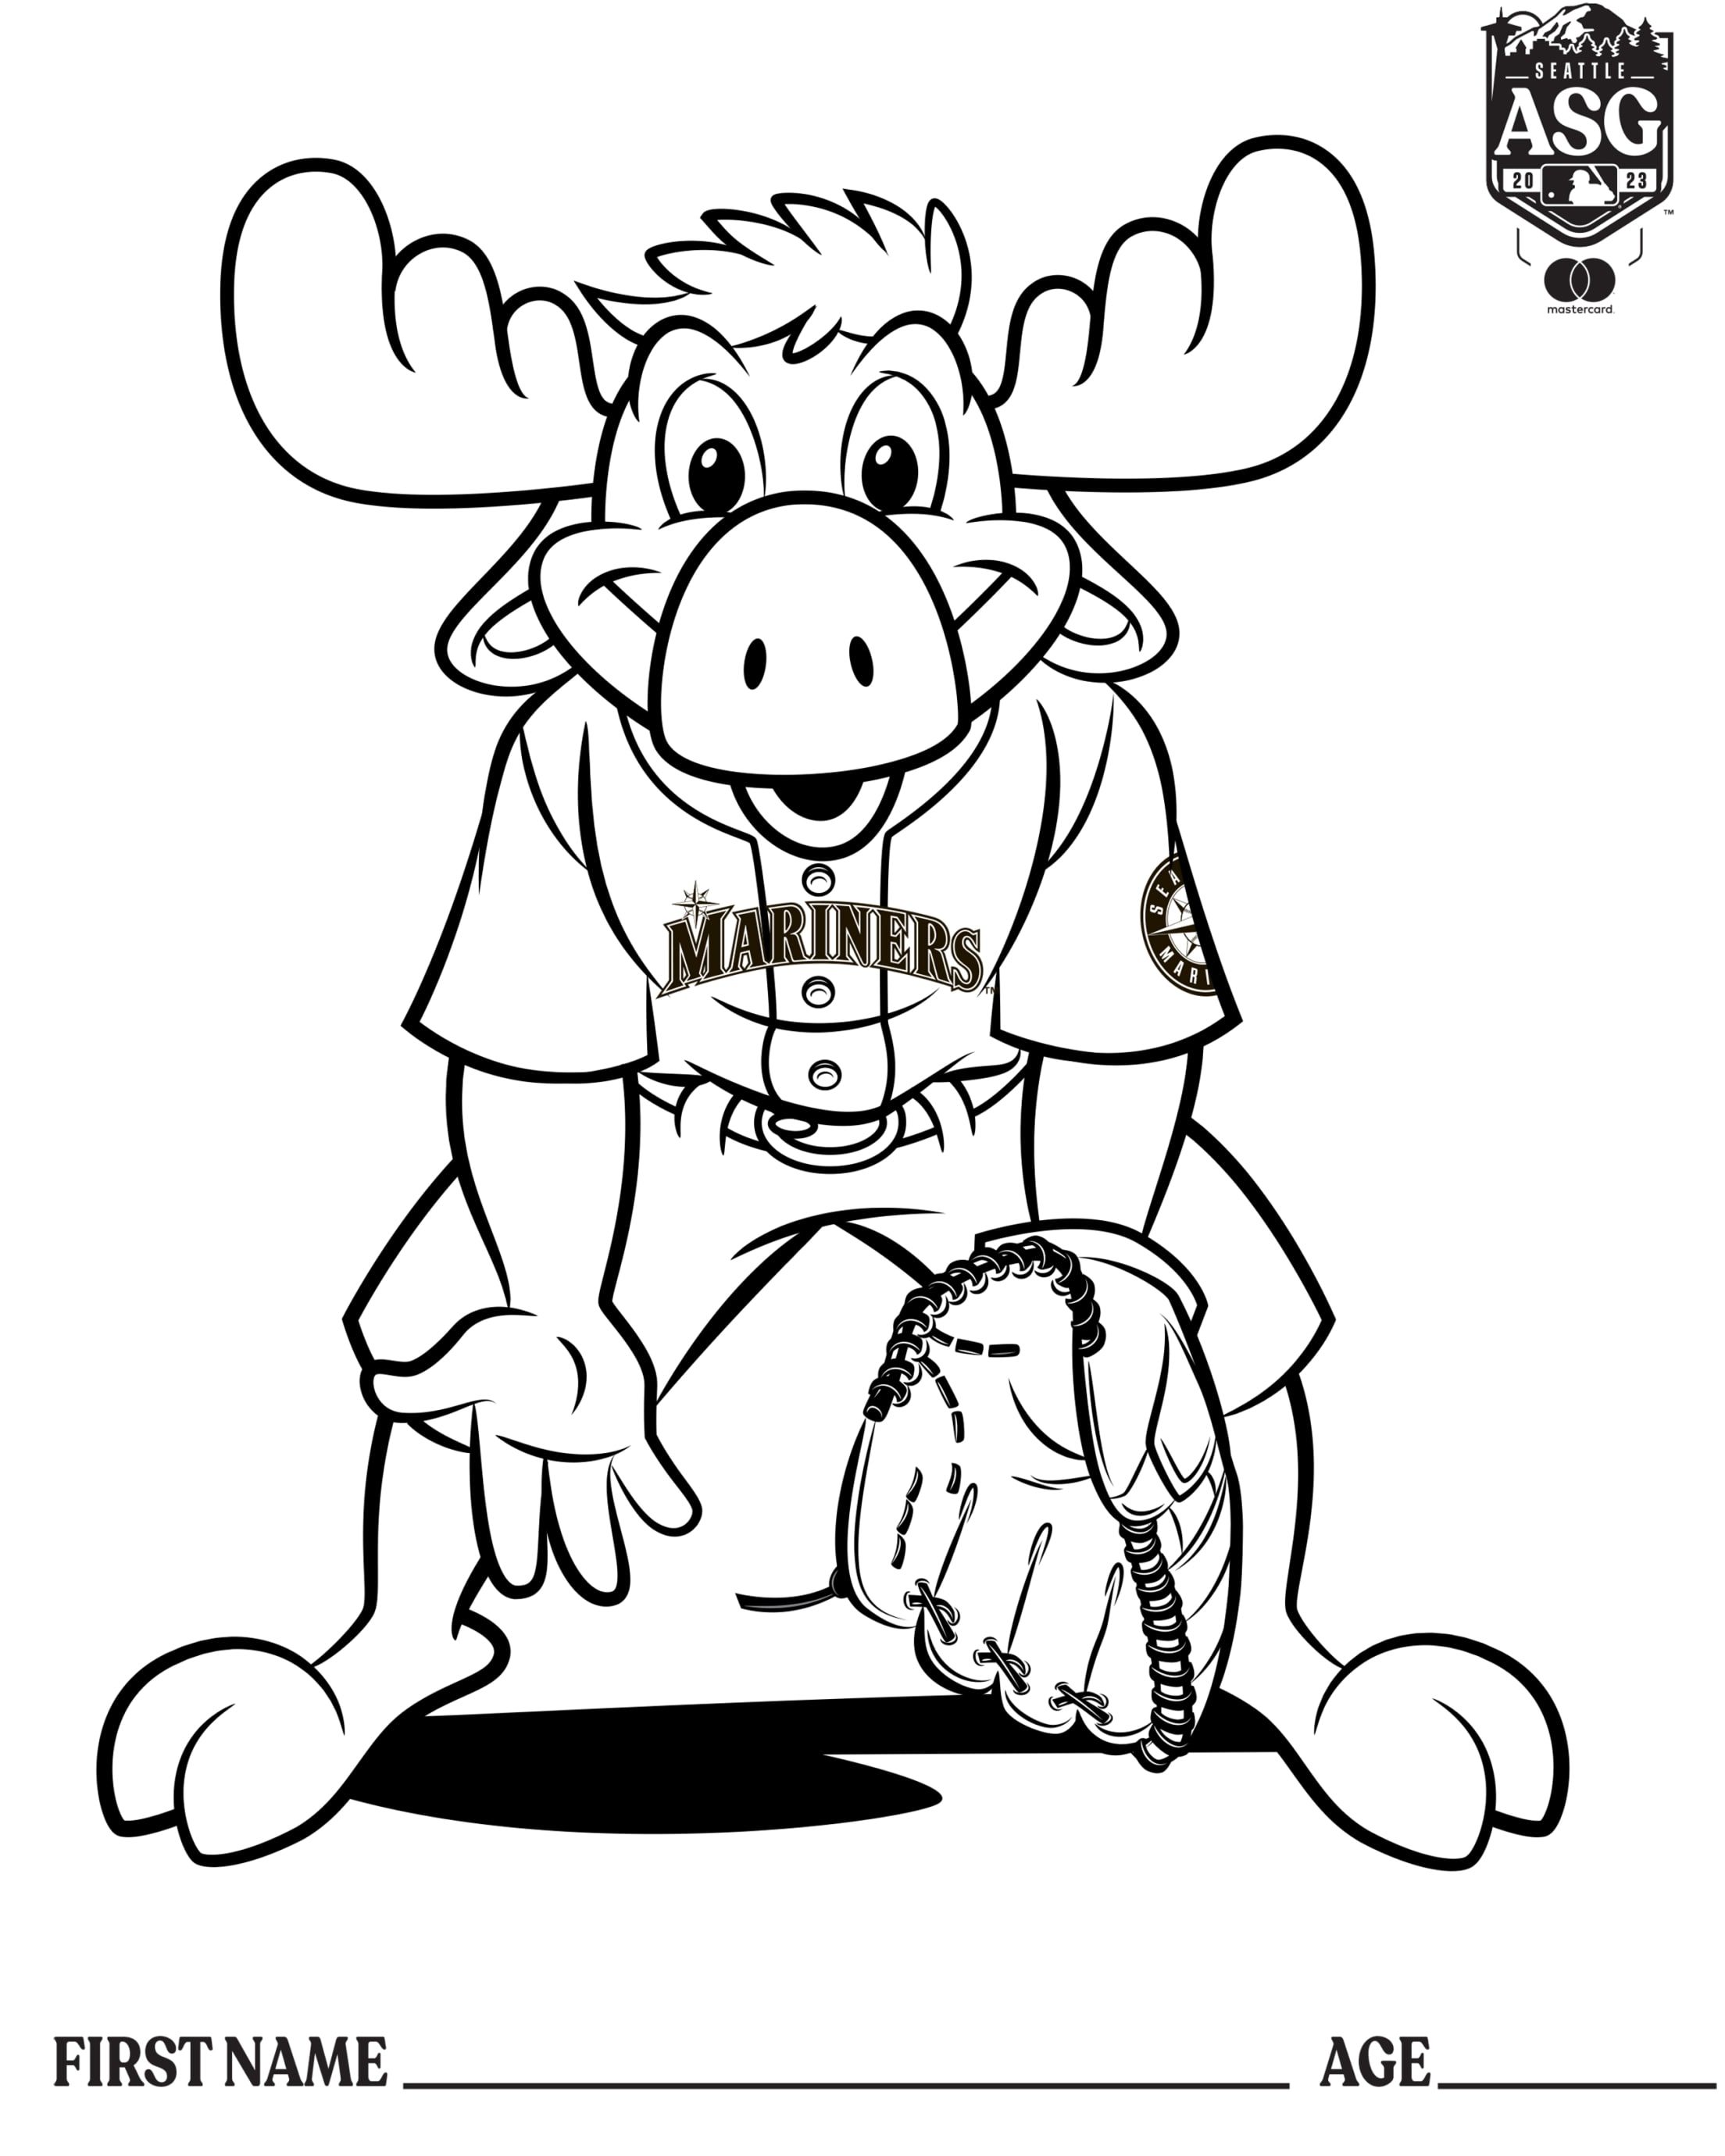 The Texas Ranger star coloring page printable game